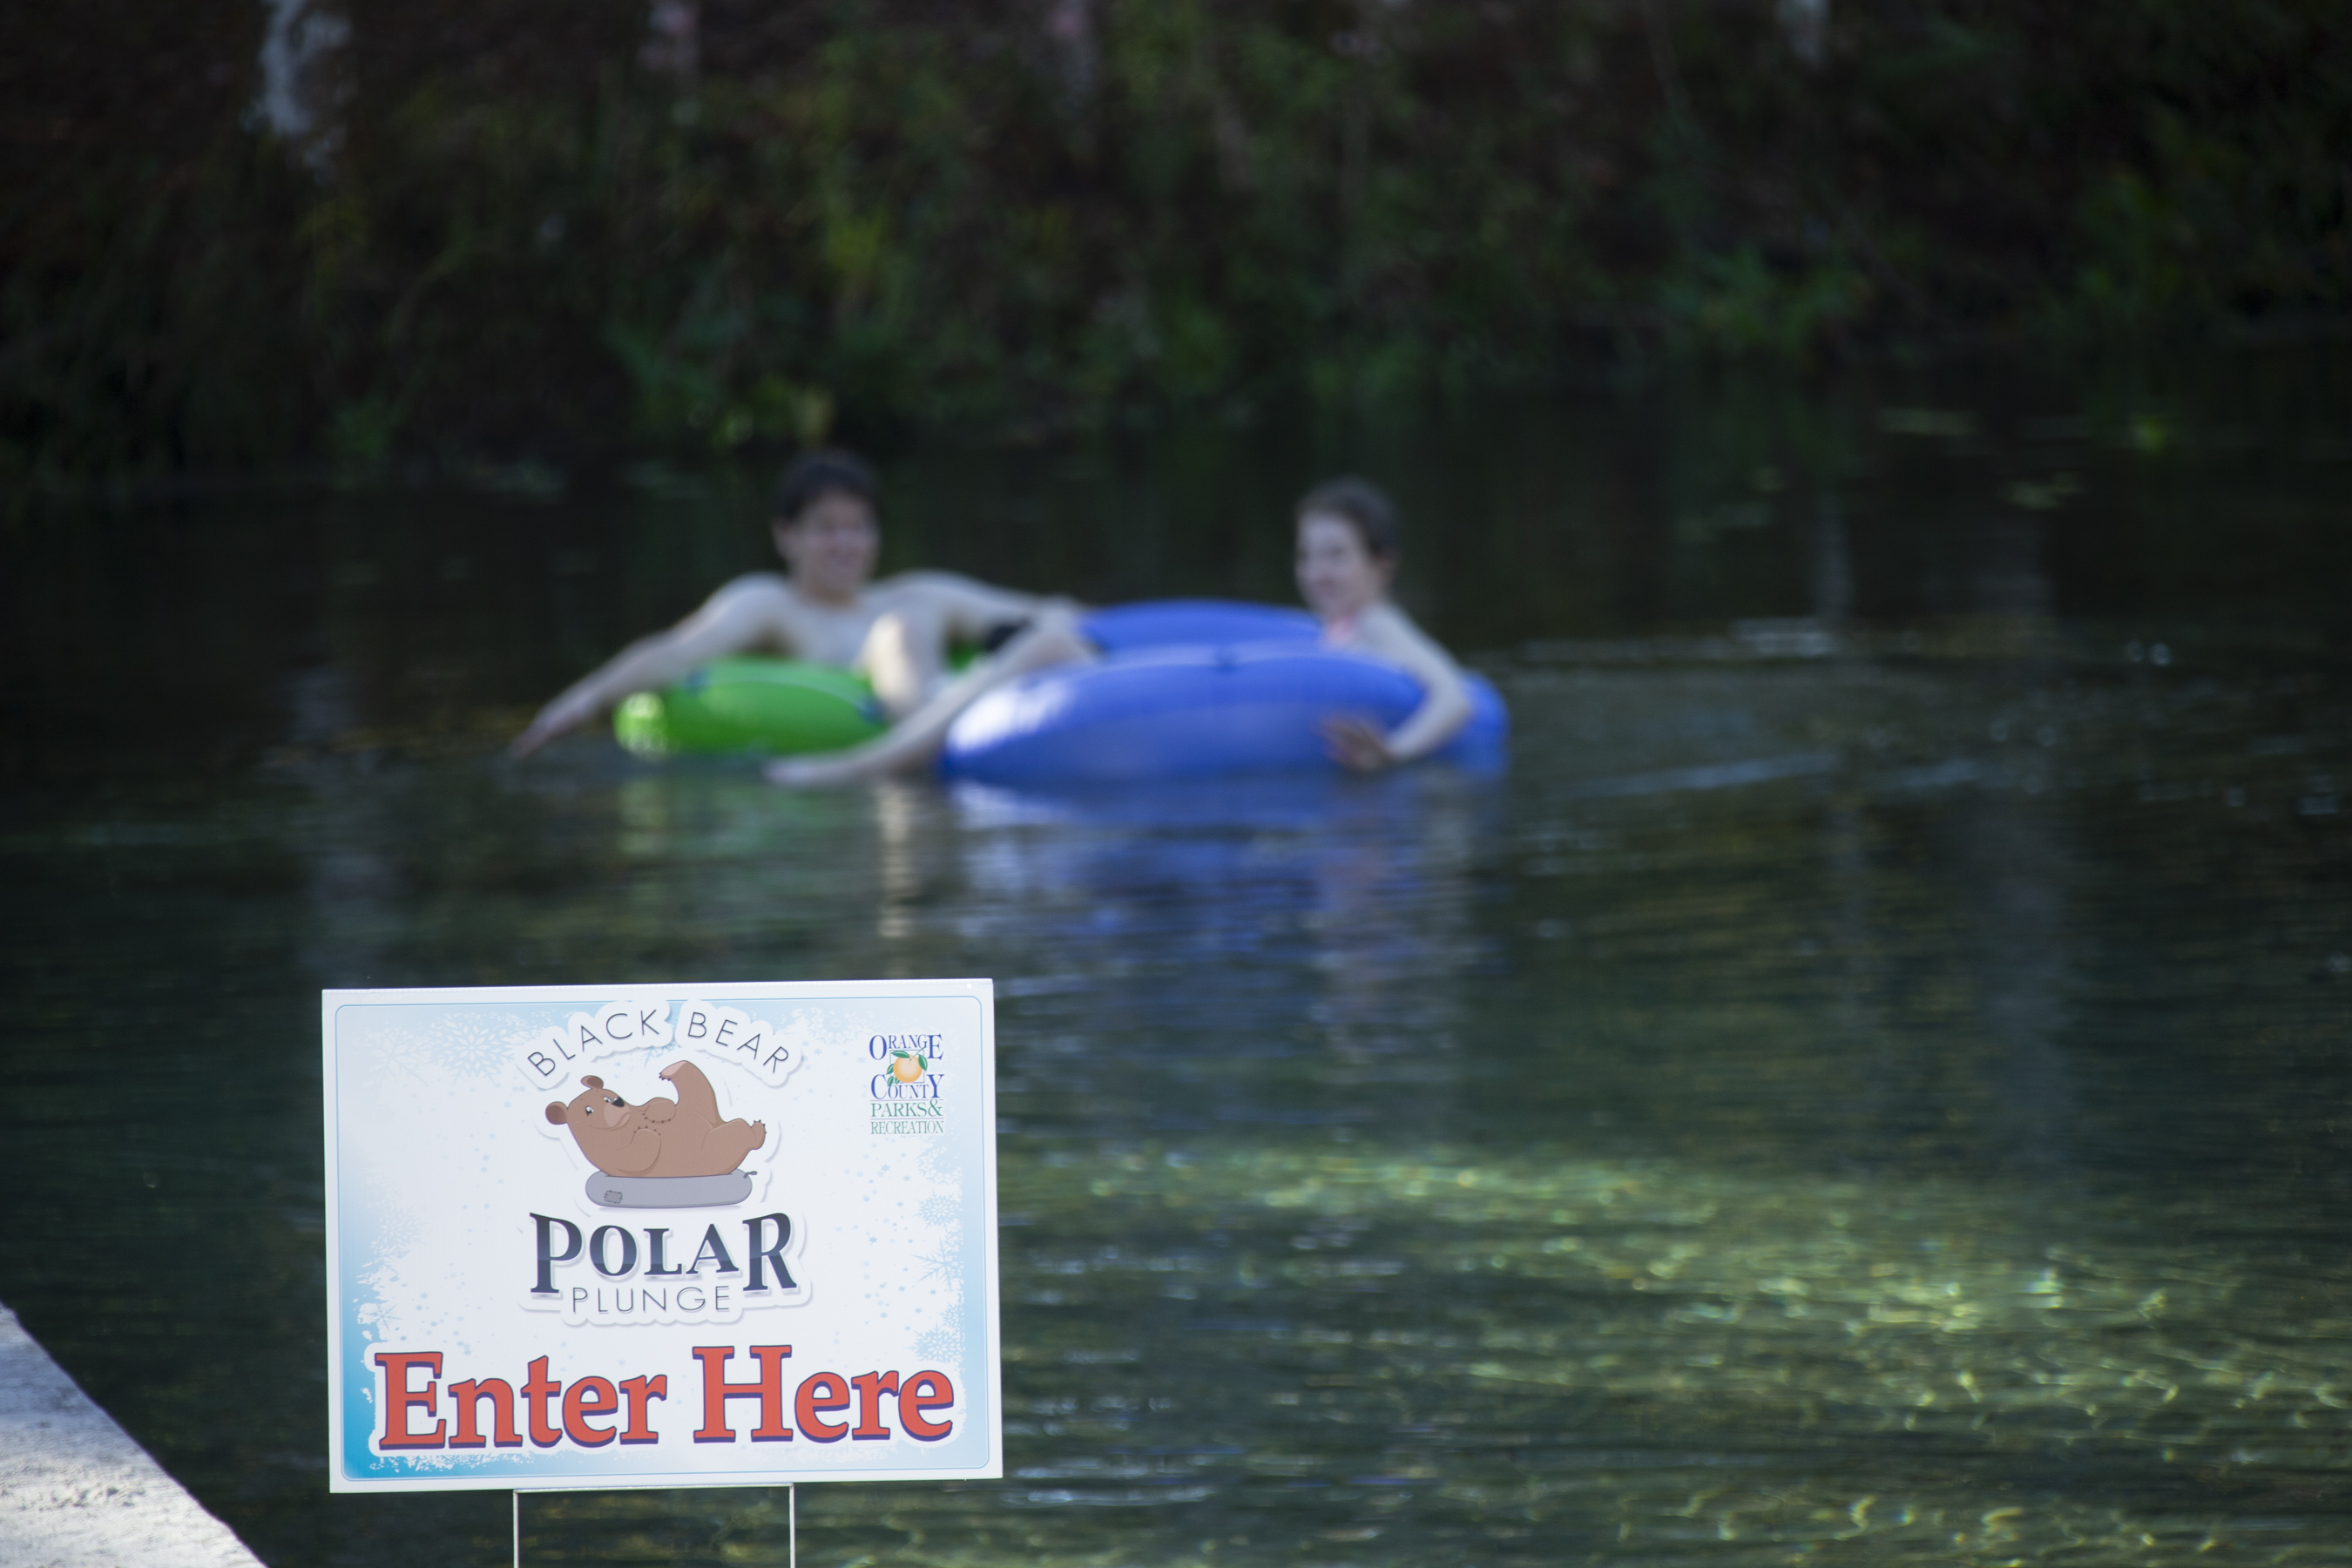 In the foreground there is a sign advertising the polar plunge event, while in the background there are two people on rubber donuts floating in the water.